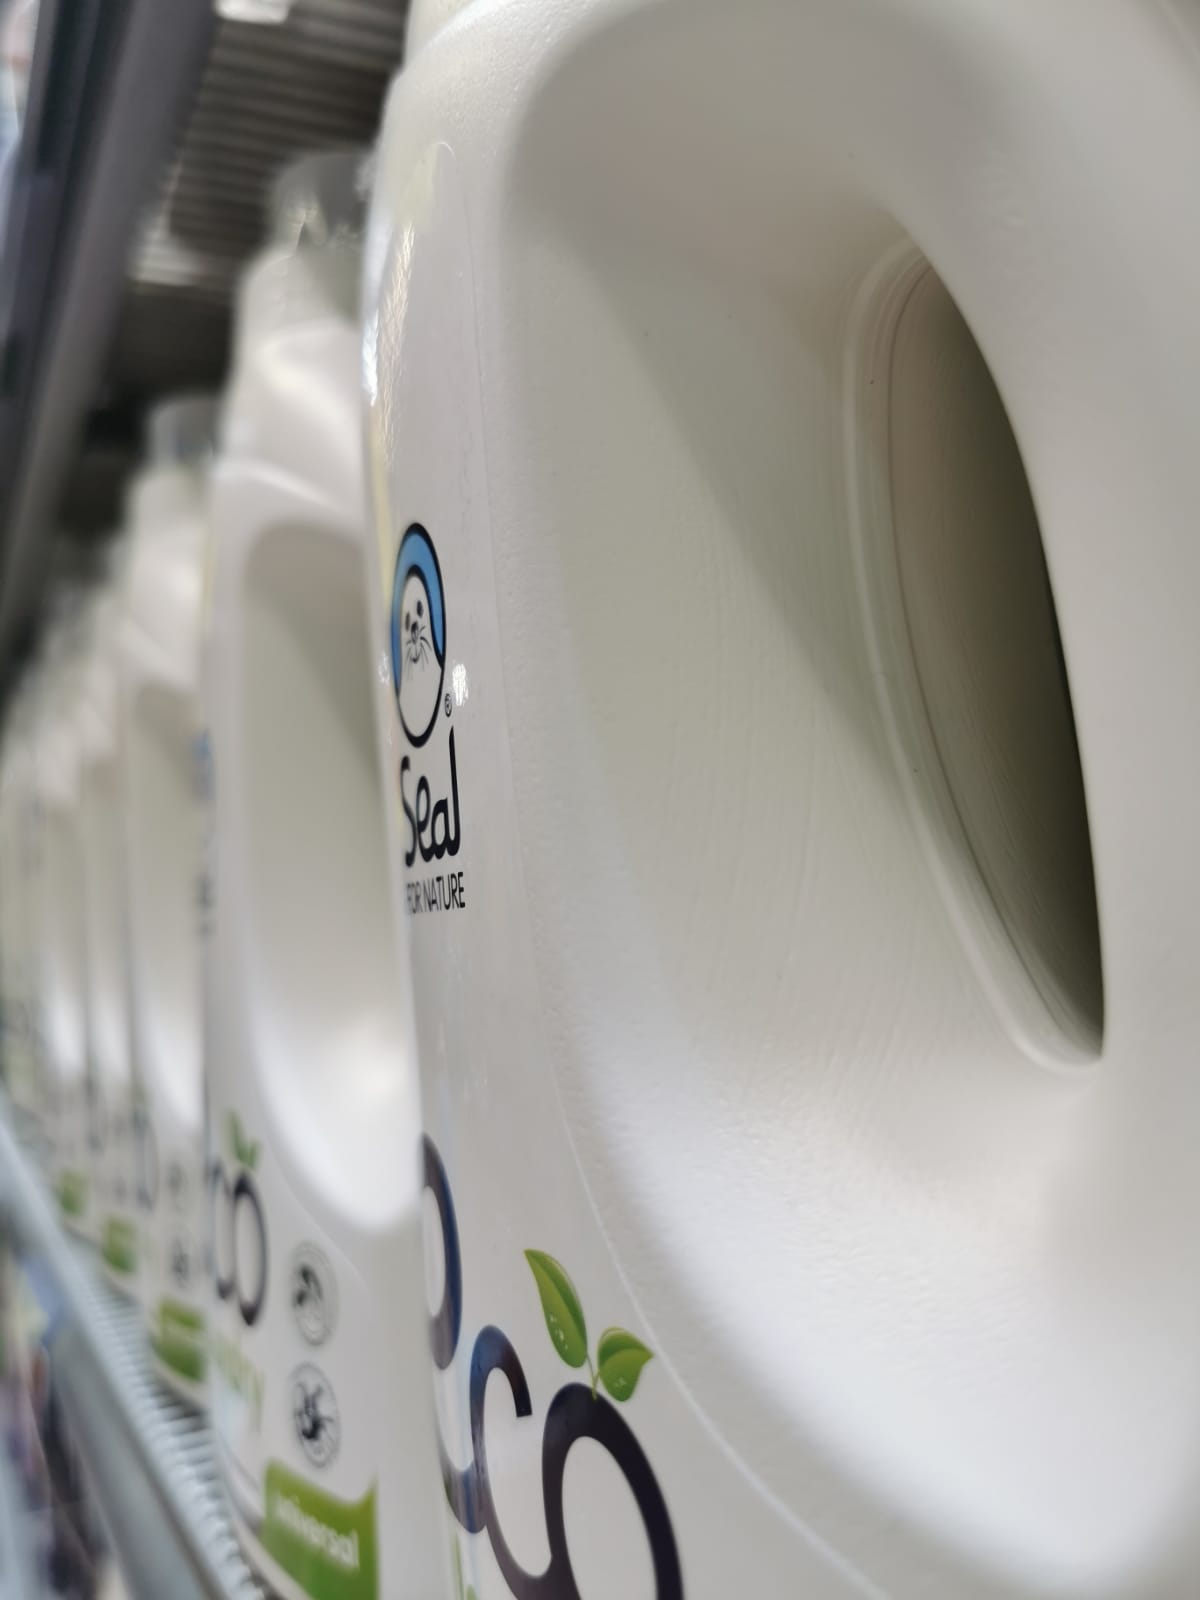 ecological laundry product from brand Seal of Spodrība put on a shelf as a result of successful merchandising work